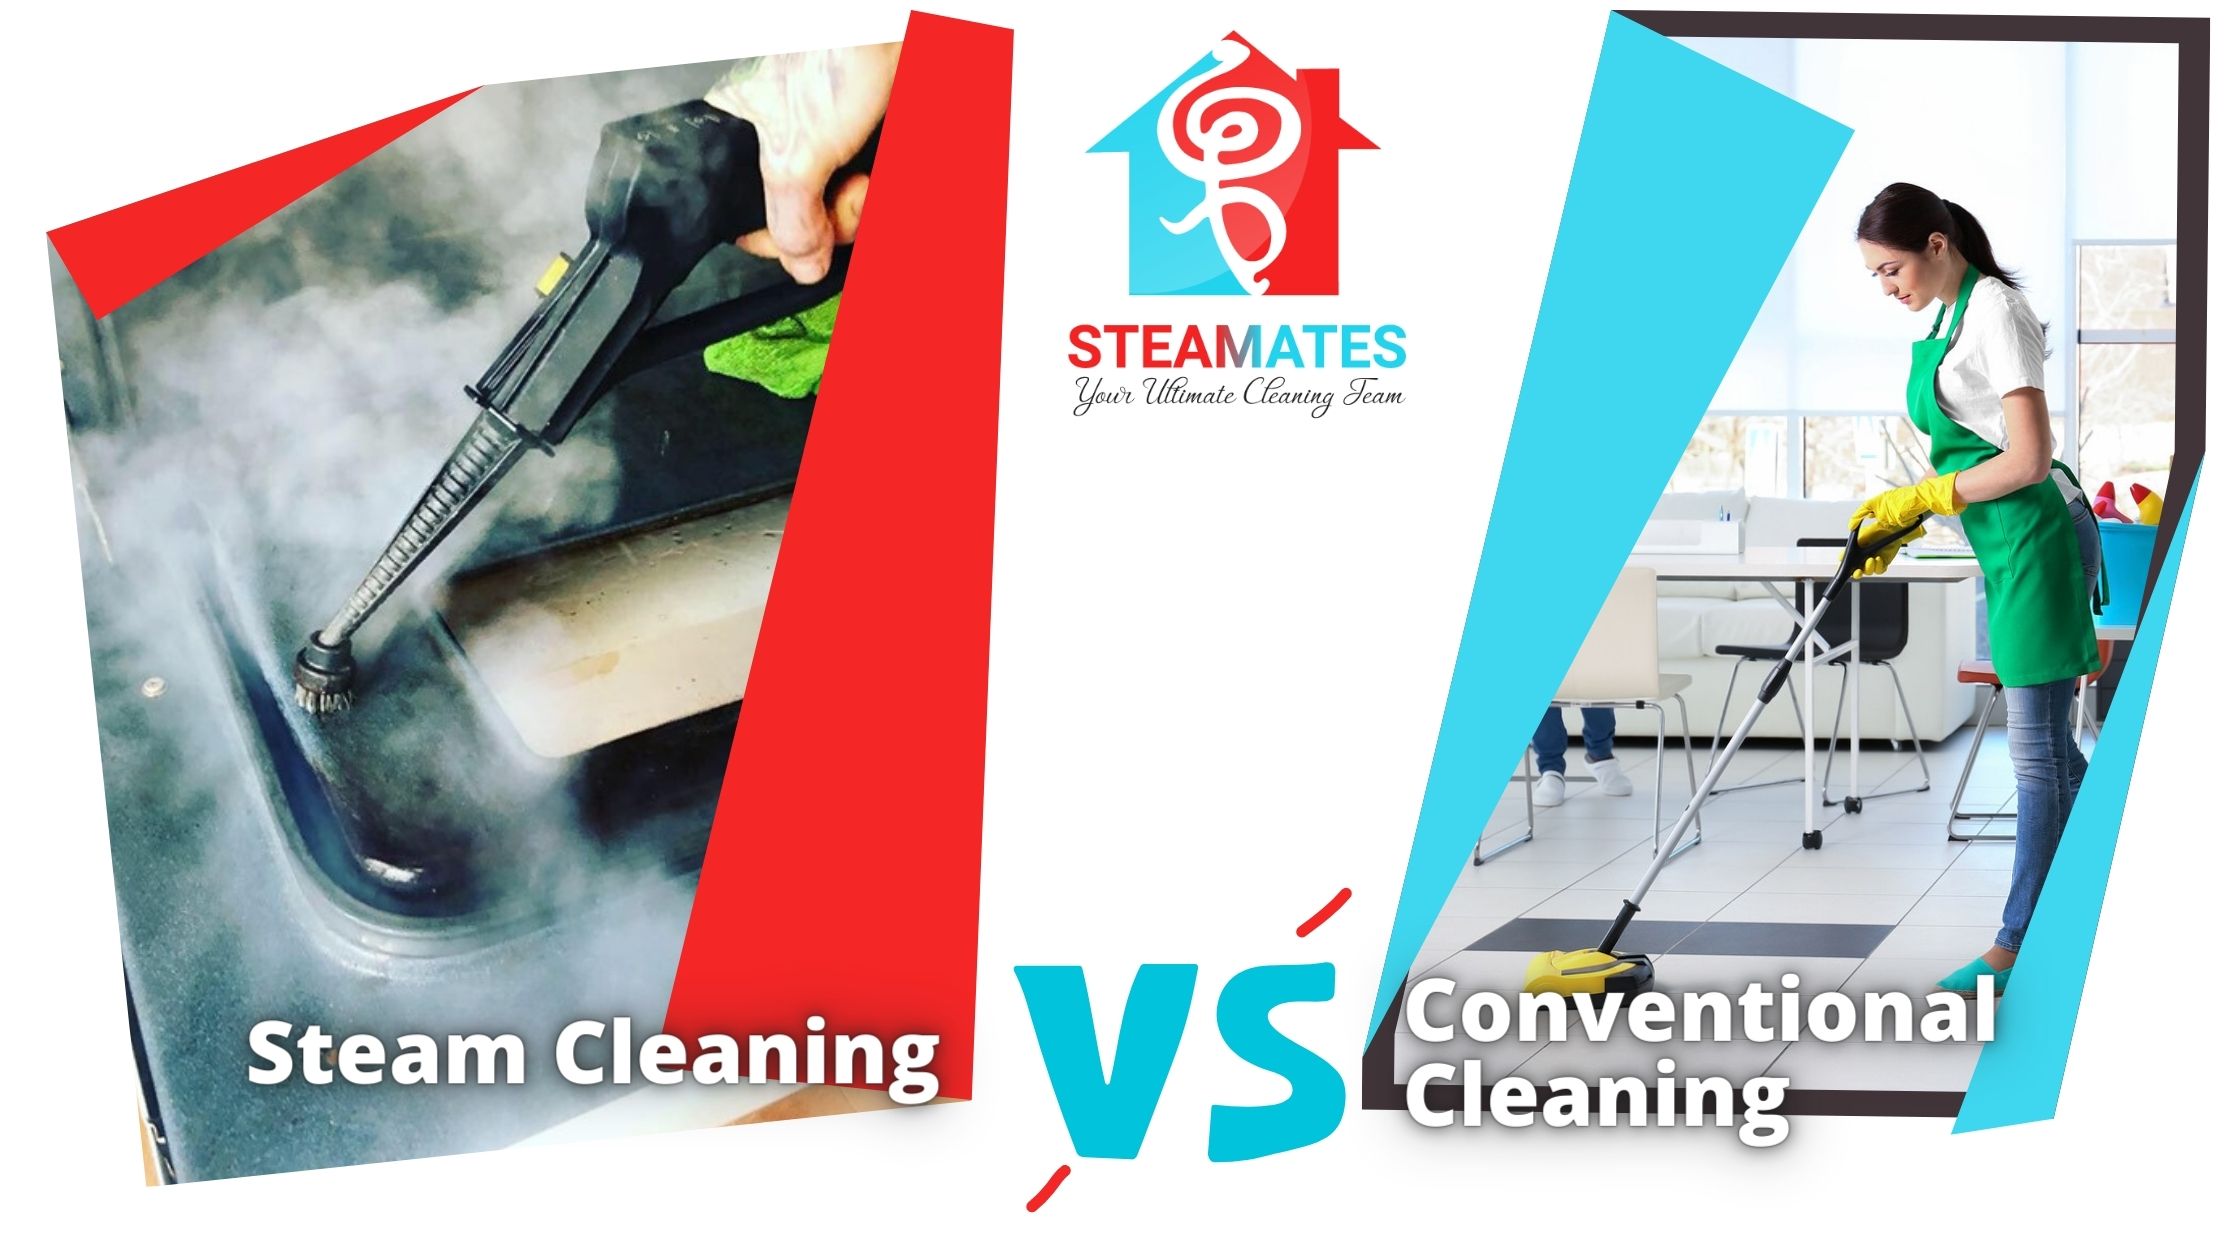 Steam Cleaning vs Conventional cleaning